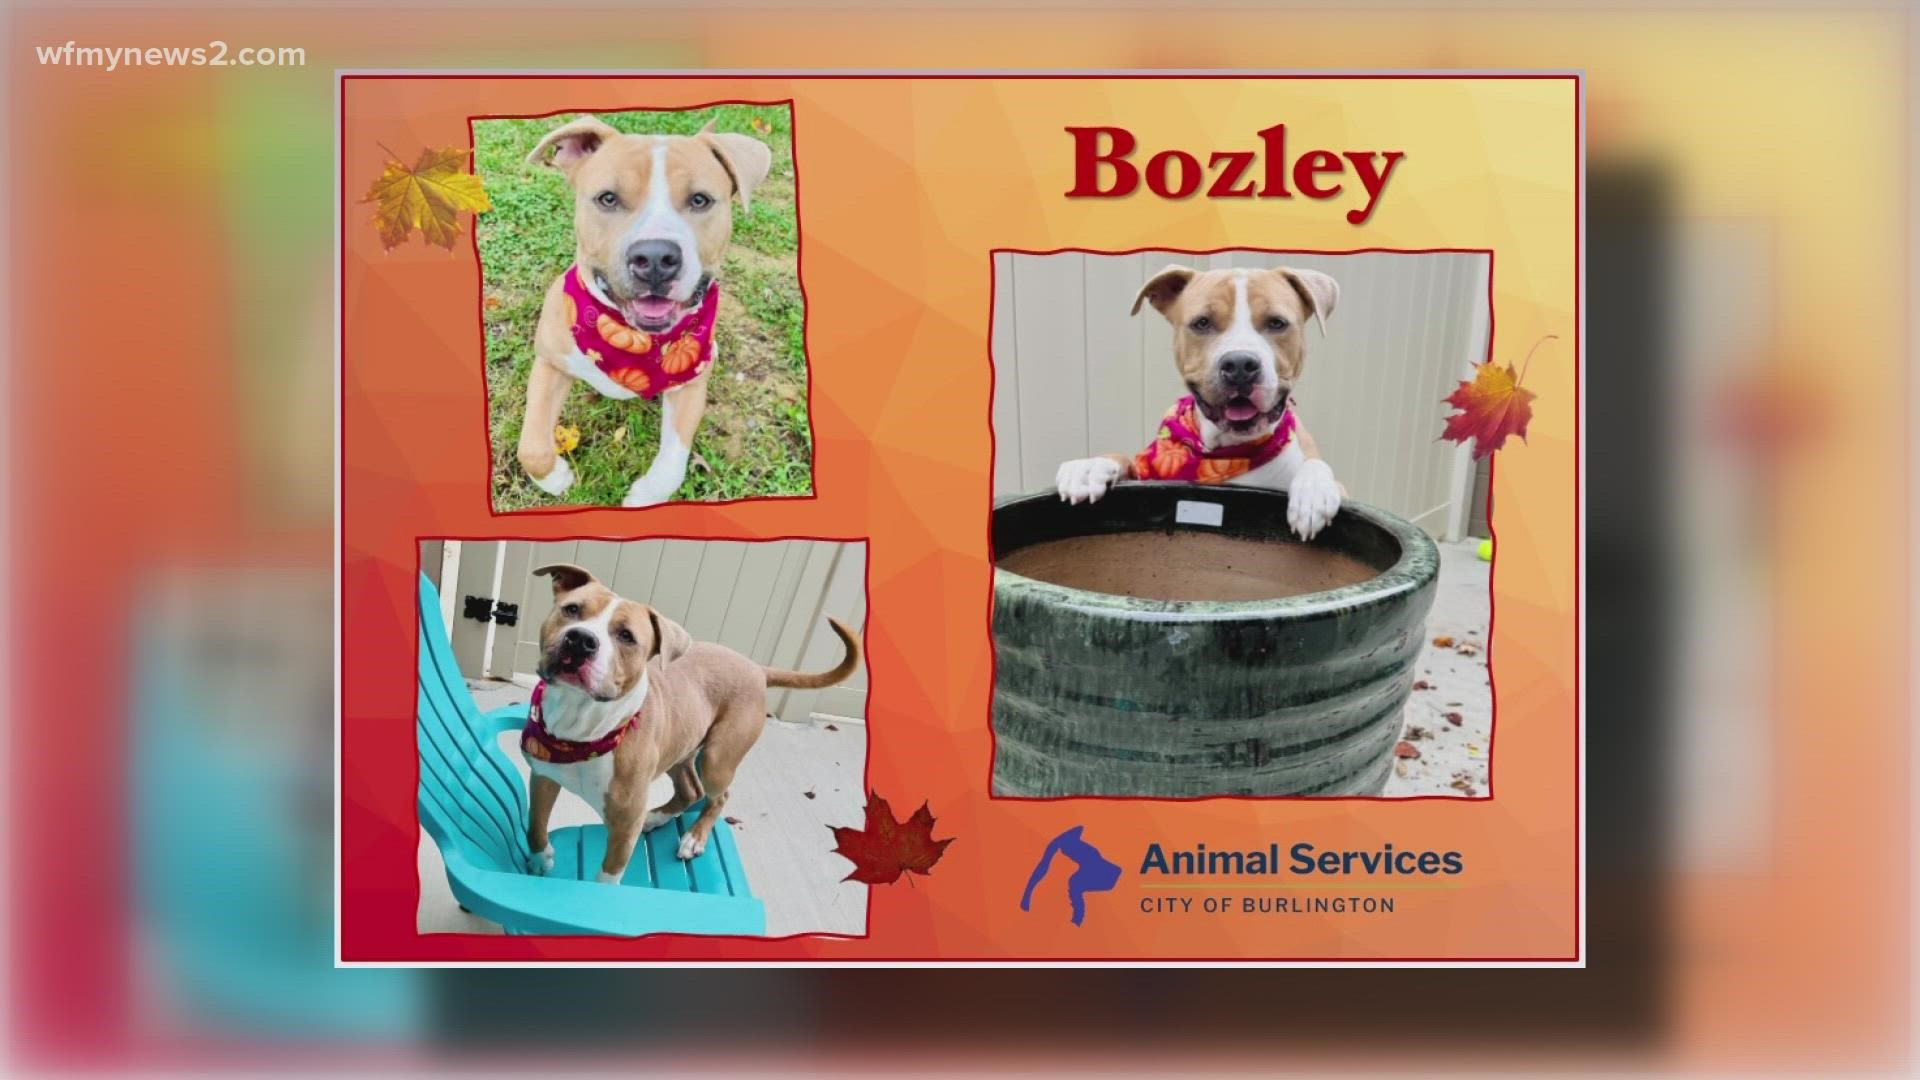 Let's get Bozley adopted!